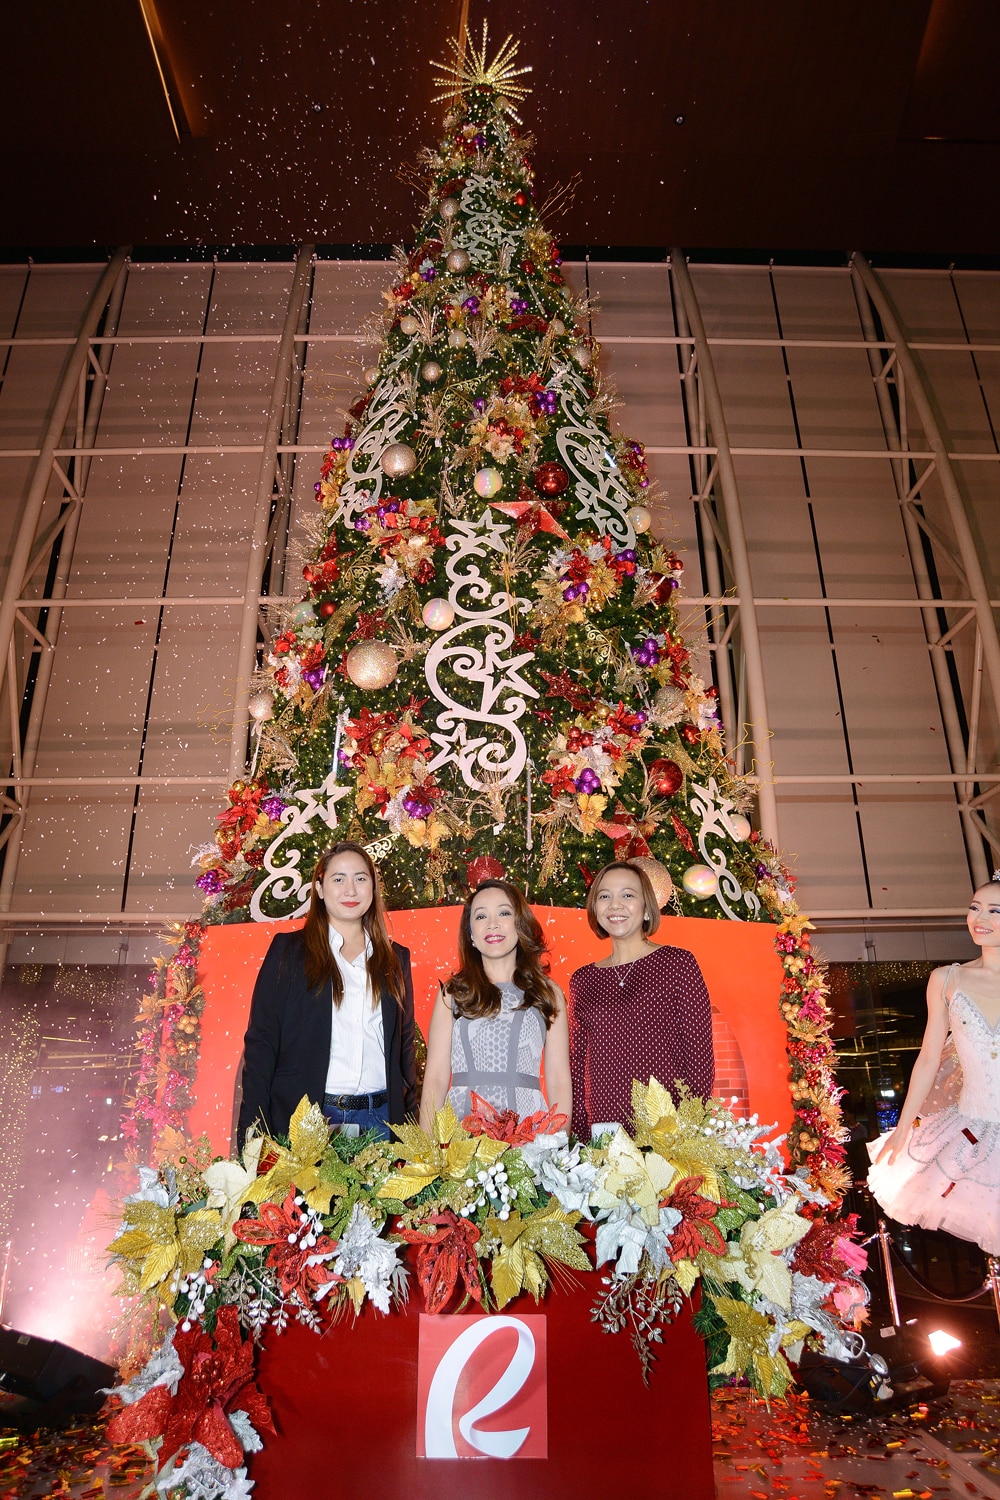 40 days to X'mas: Robinsons lights up giant Christmas trees | ABS-CBN News